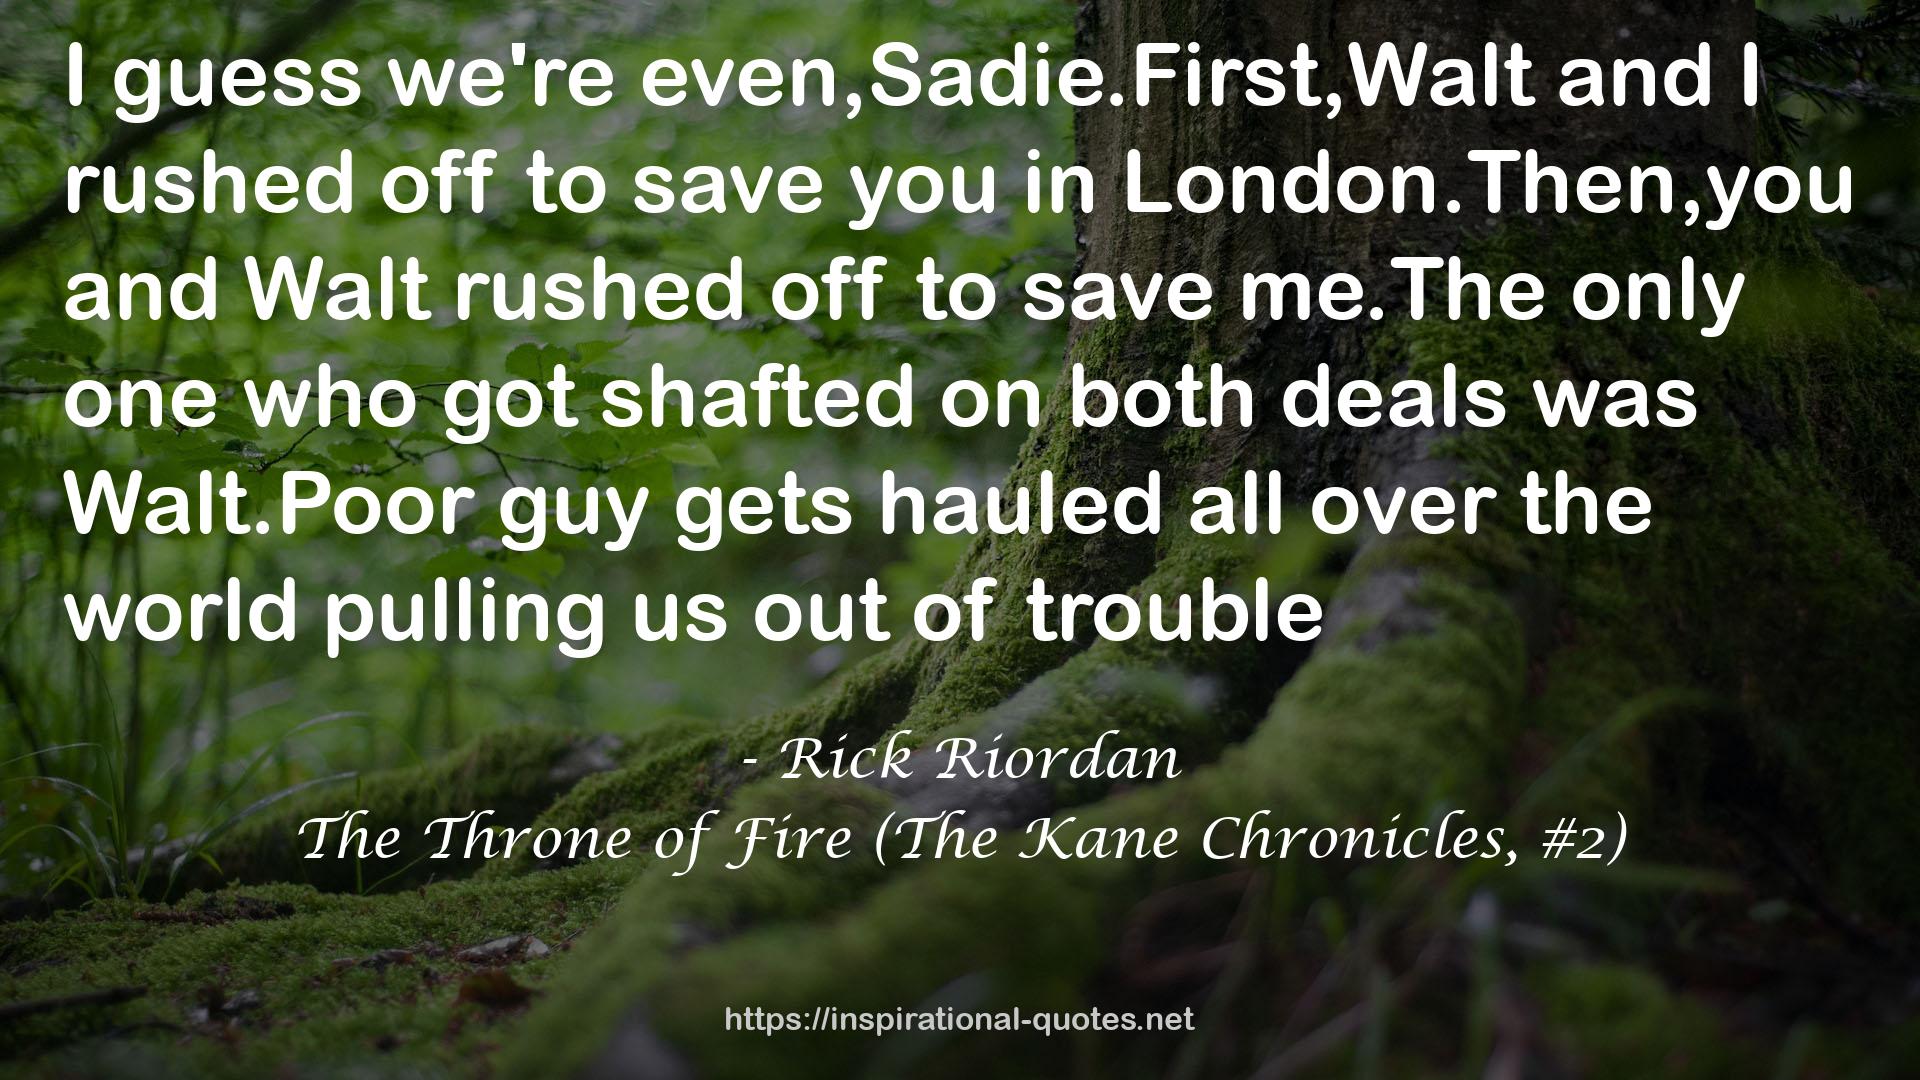 The Throne of Fire (The Kane Chronicles, #2) QUOTES